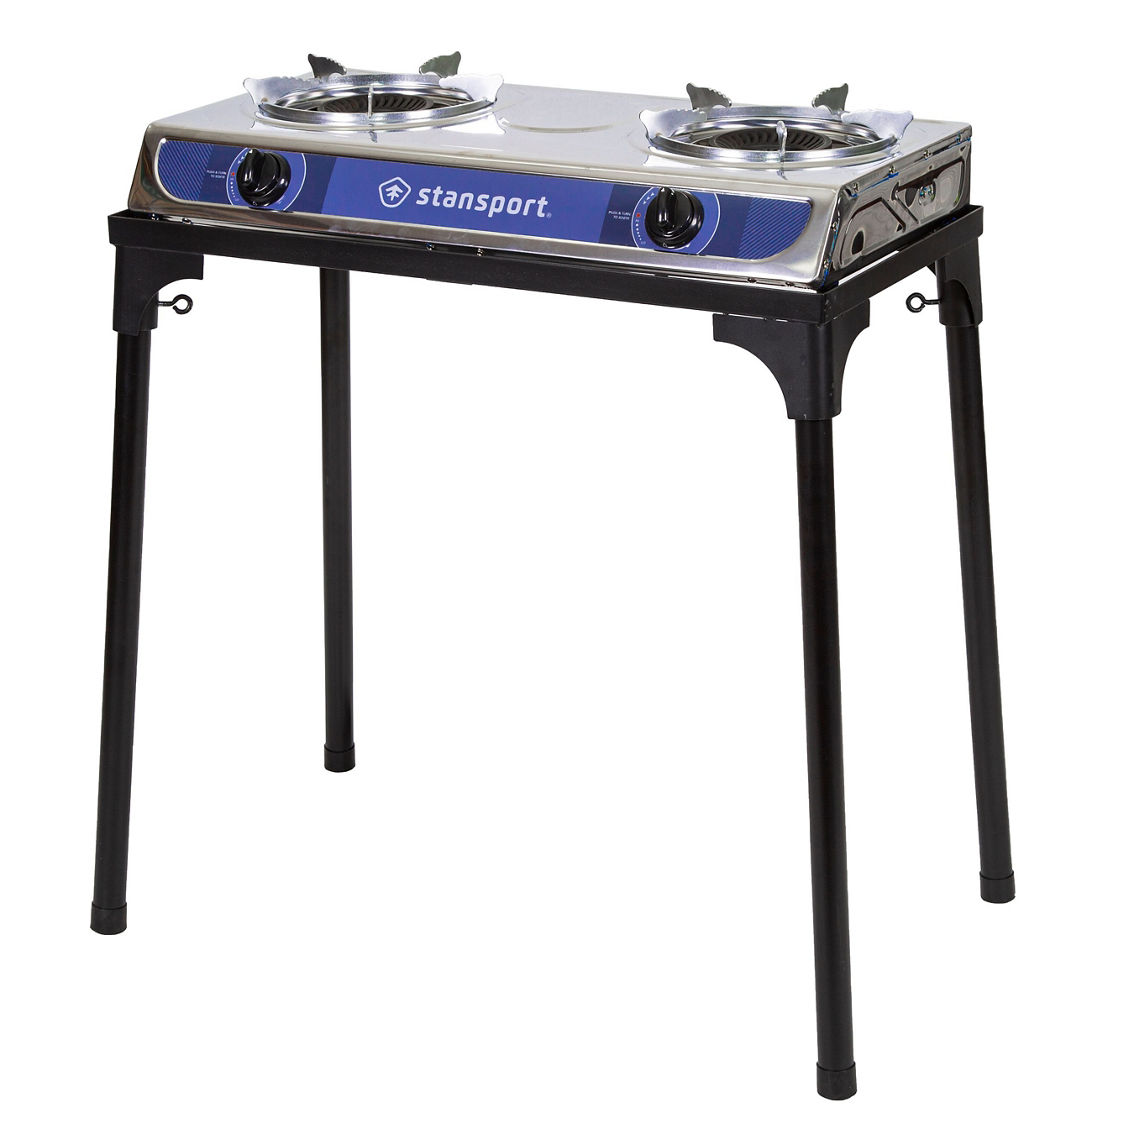 Stansport Gourmet Propane Stove - Image 2 of 4